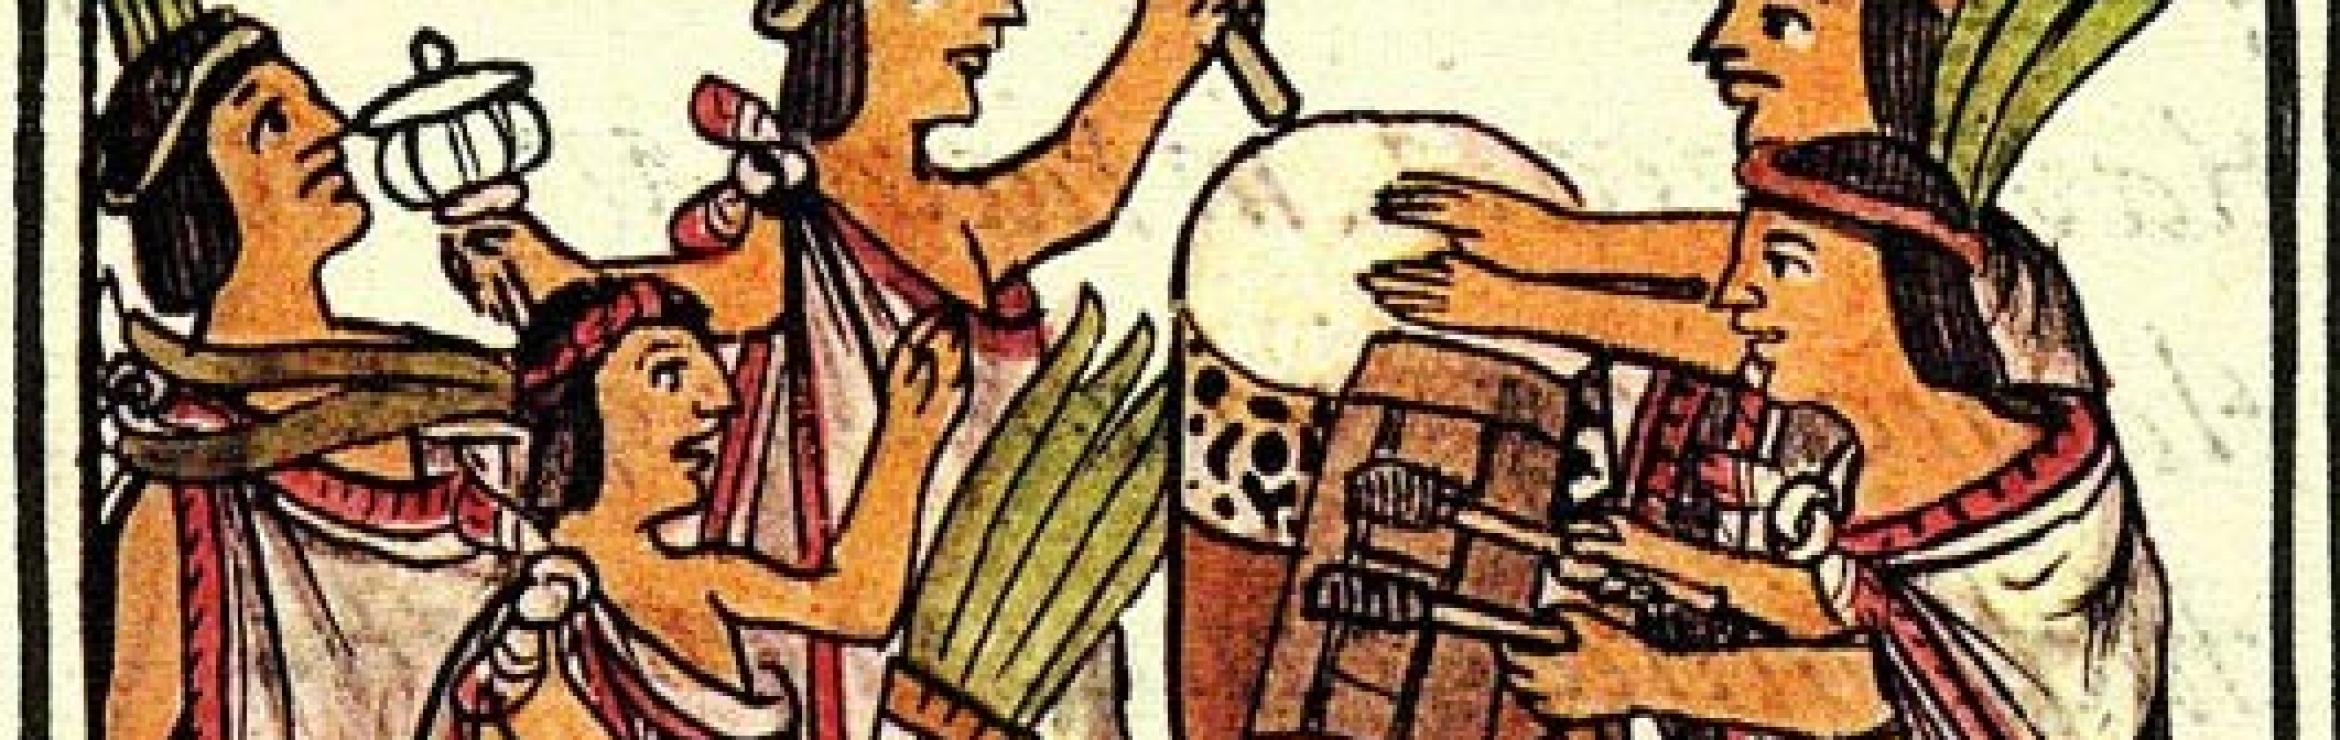 Illustration of Aztec people as depicted in the Historia general de las cosas de Nueva España, also known as the Florentine Codex. The image shows five Aztec people playing instruments and drums.